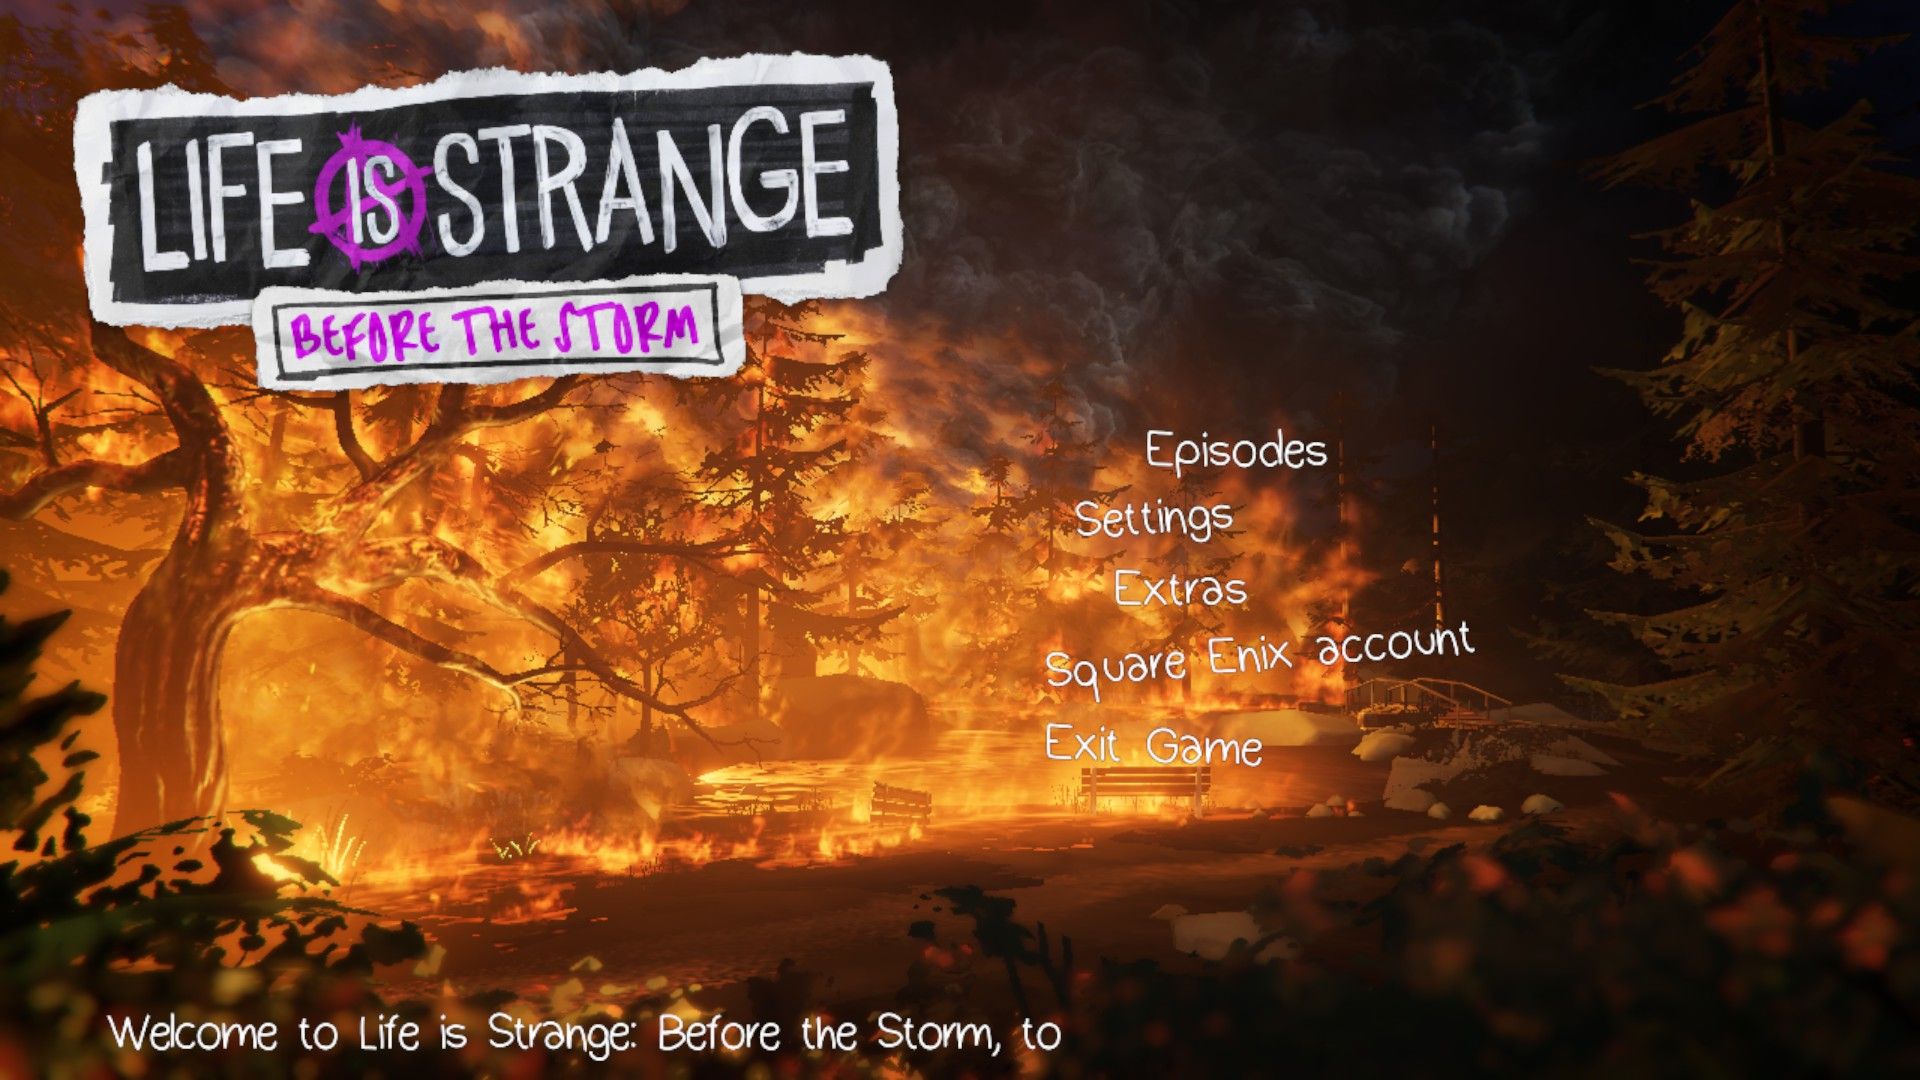 Life is Strange Before the Storm Episode 1 Review